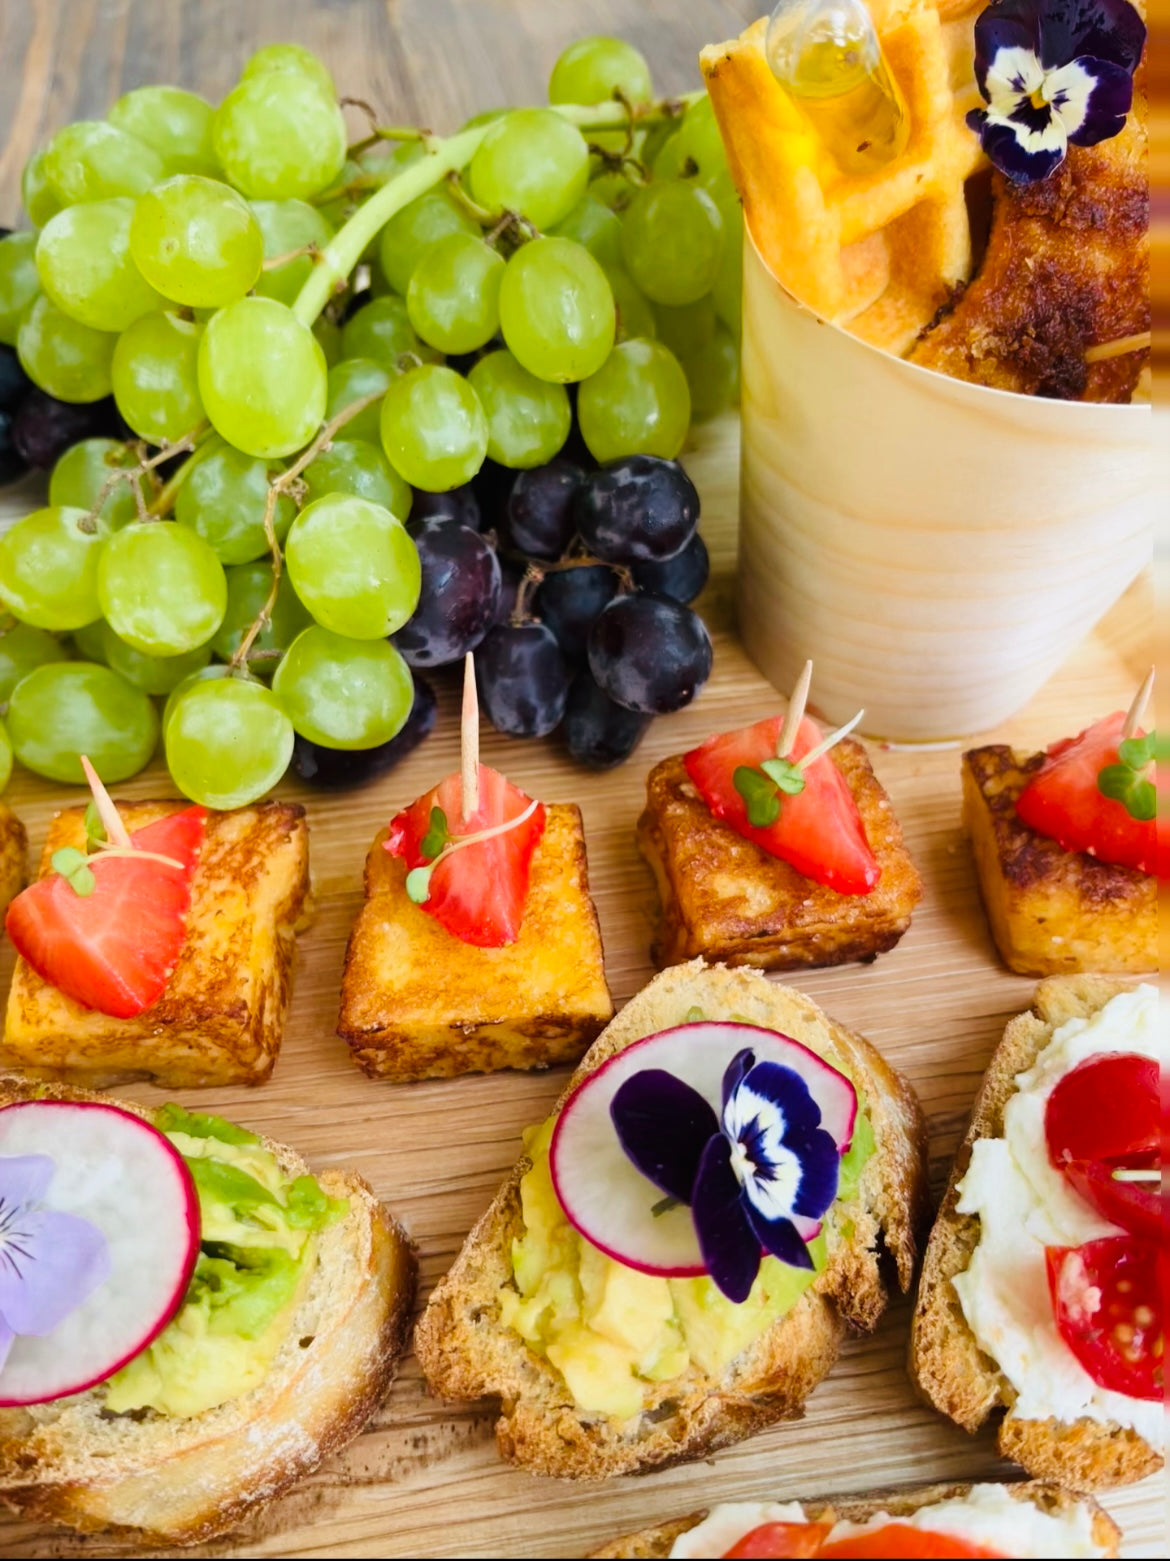 BREAKFAST / BRUNCH CANAPES